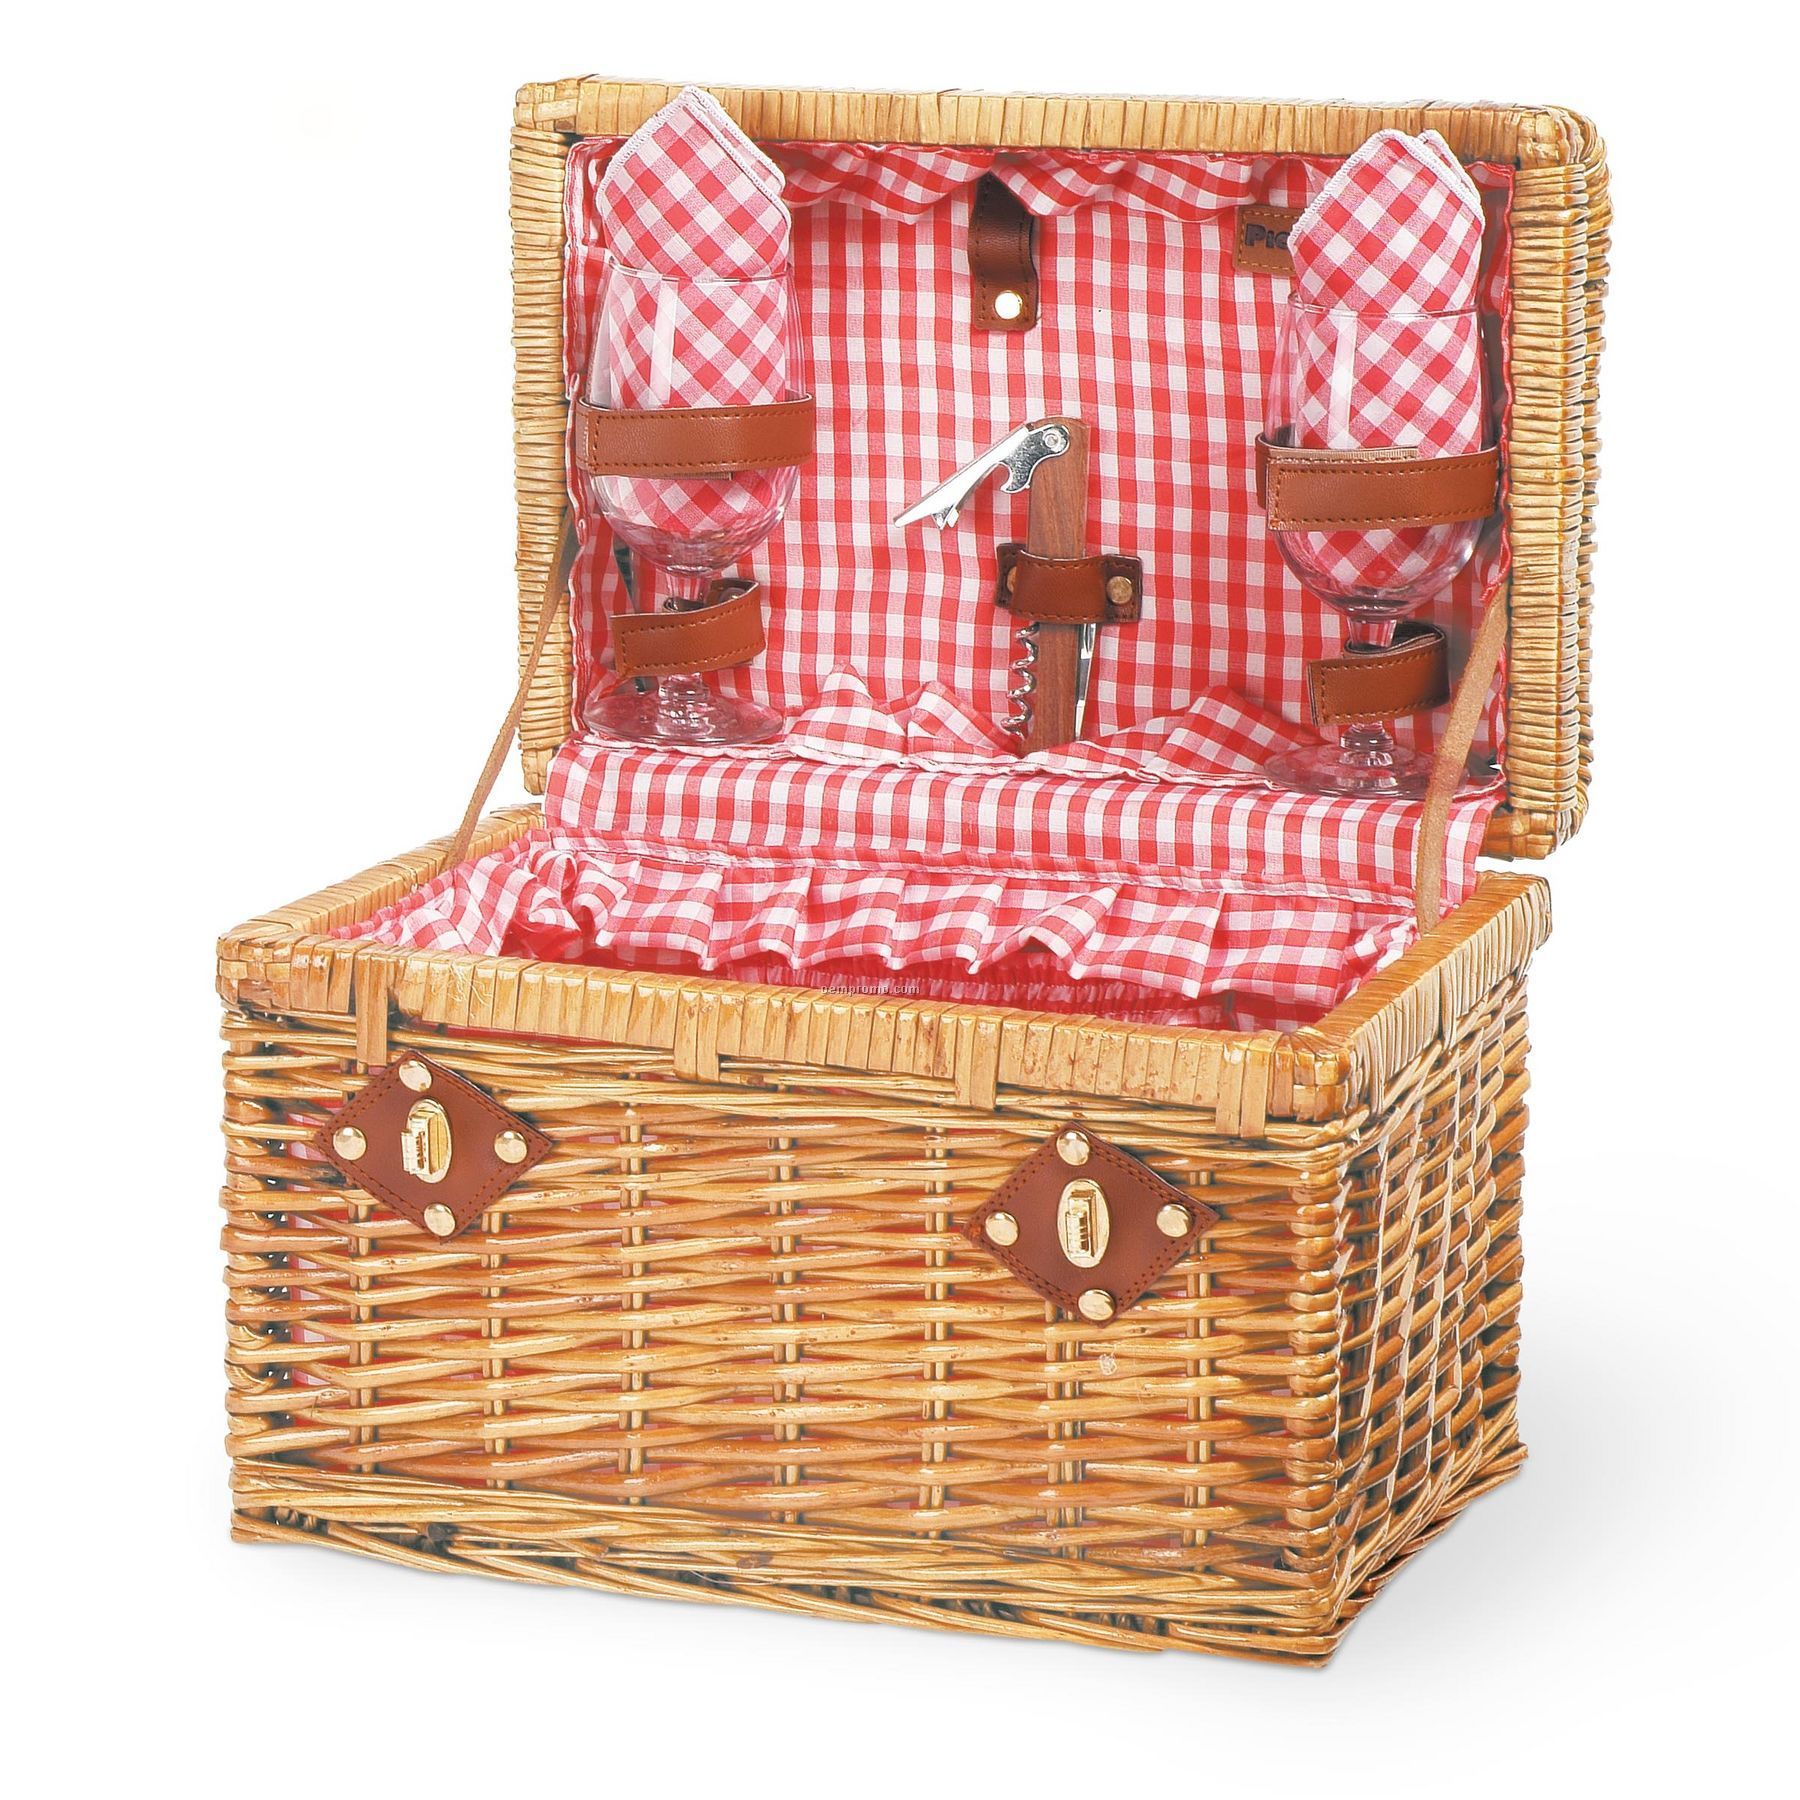 Chardonnay Picnic Basket W/ Wine Service For 2 (Red Checkered Accents)